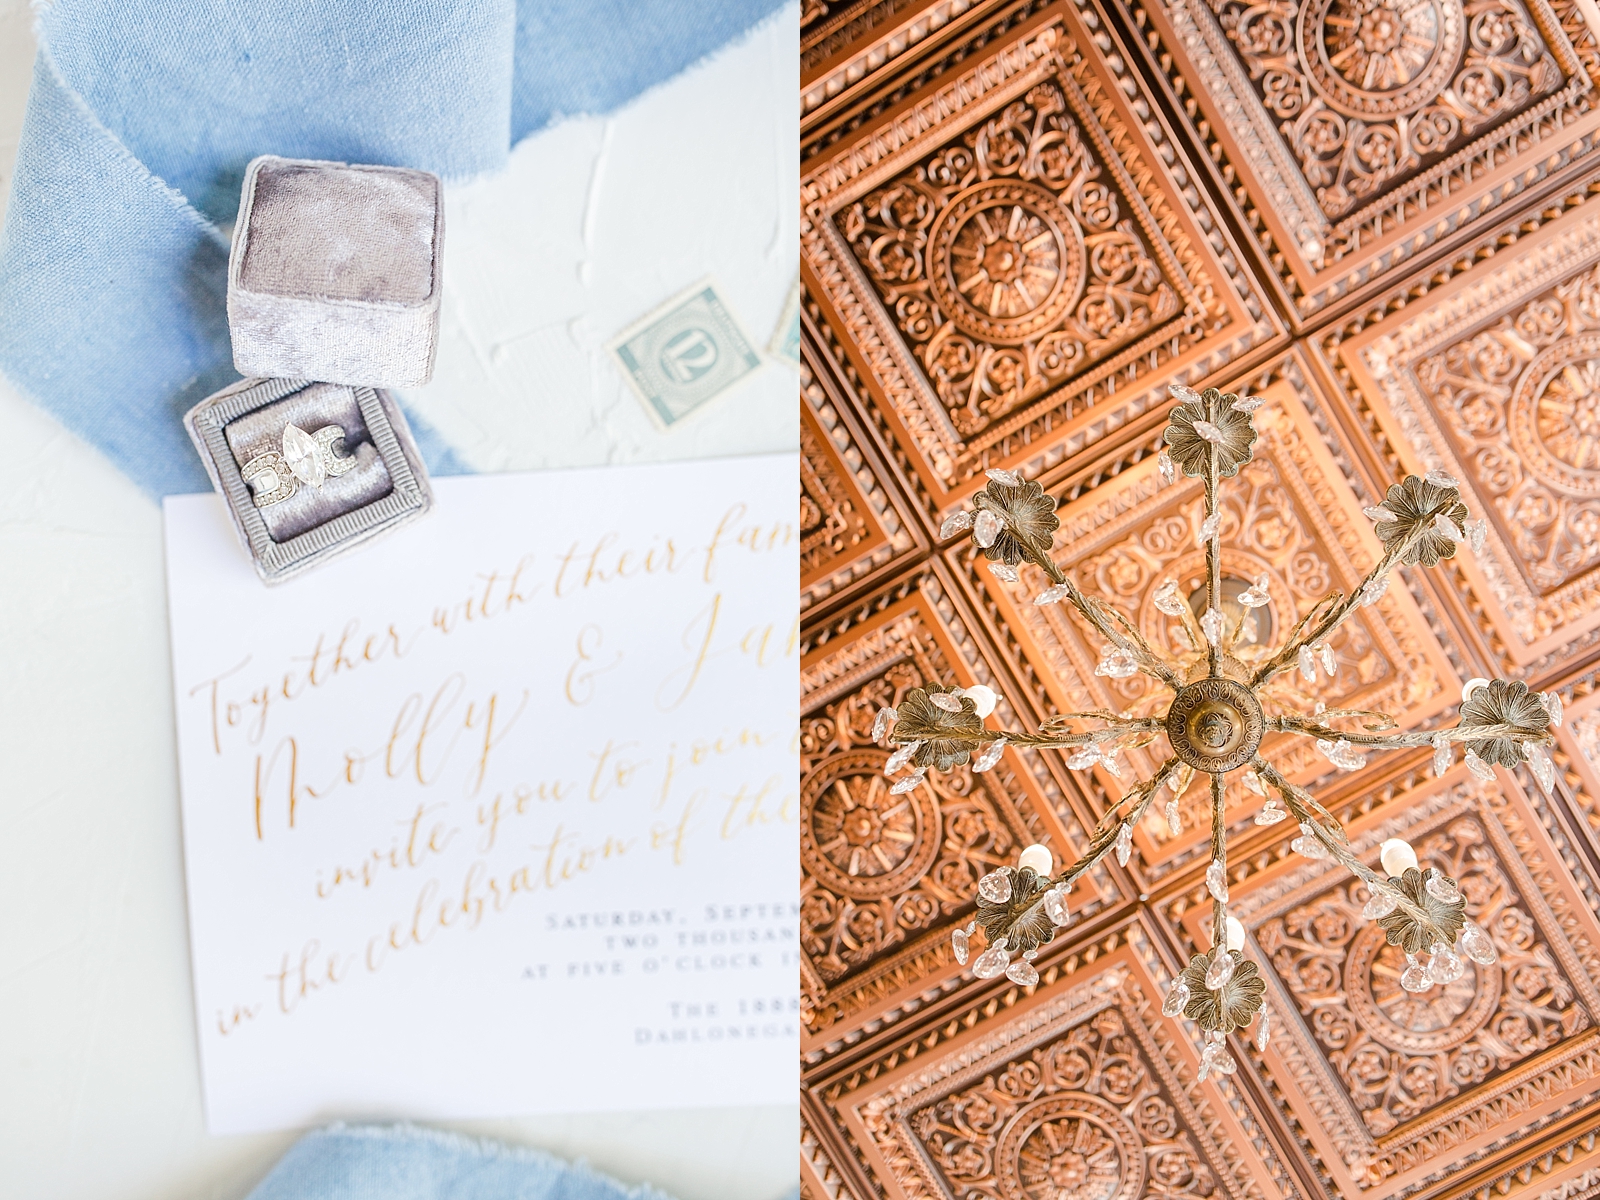 Dahlonega Wedding Venue Invitation Suite with Wedding Ring and The 1888 House ceiling and chandelier detail Photos